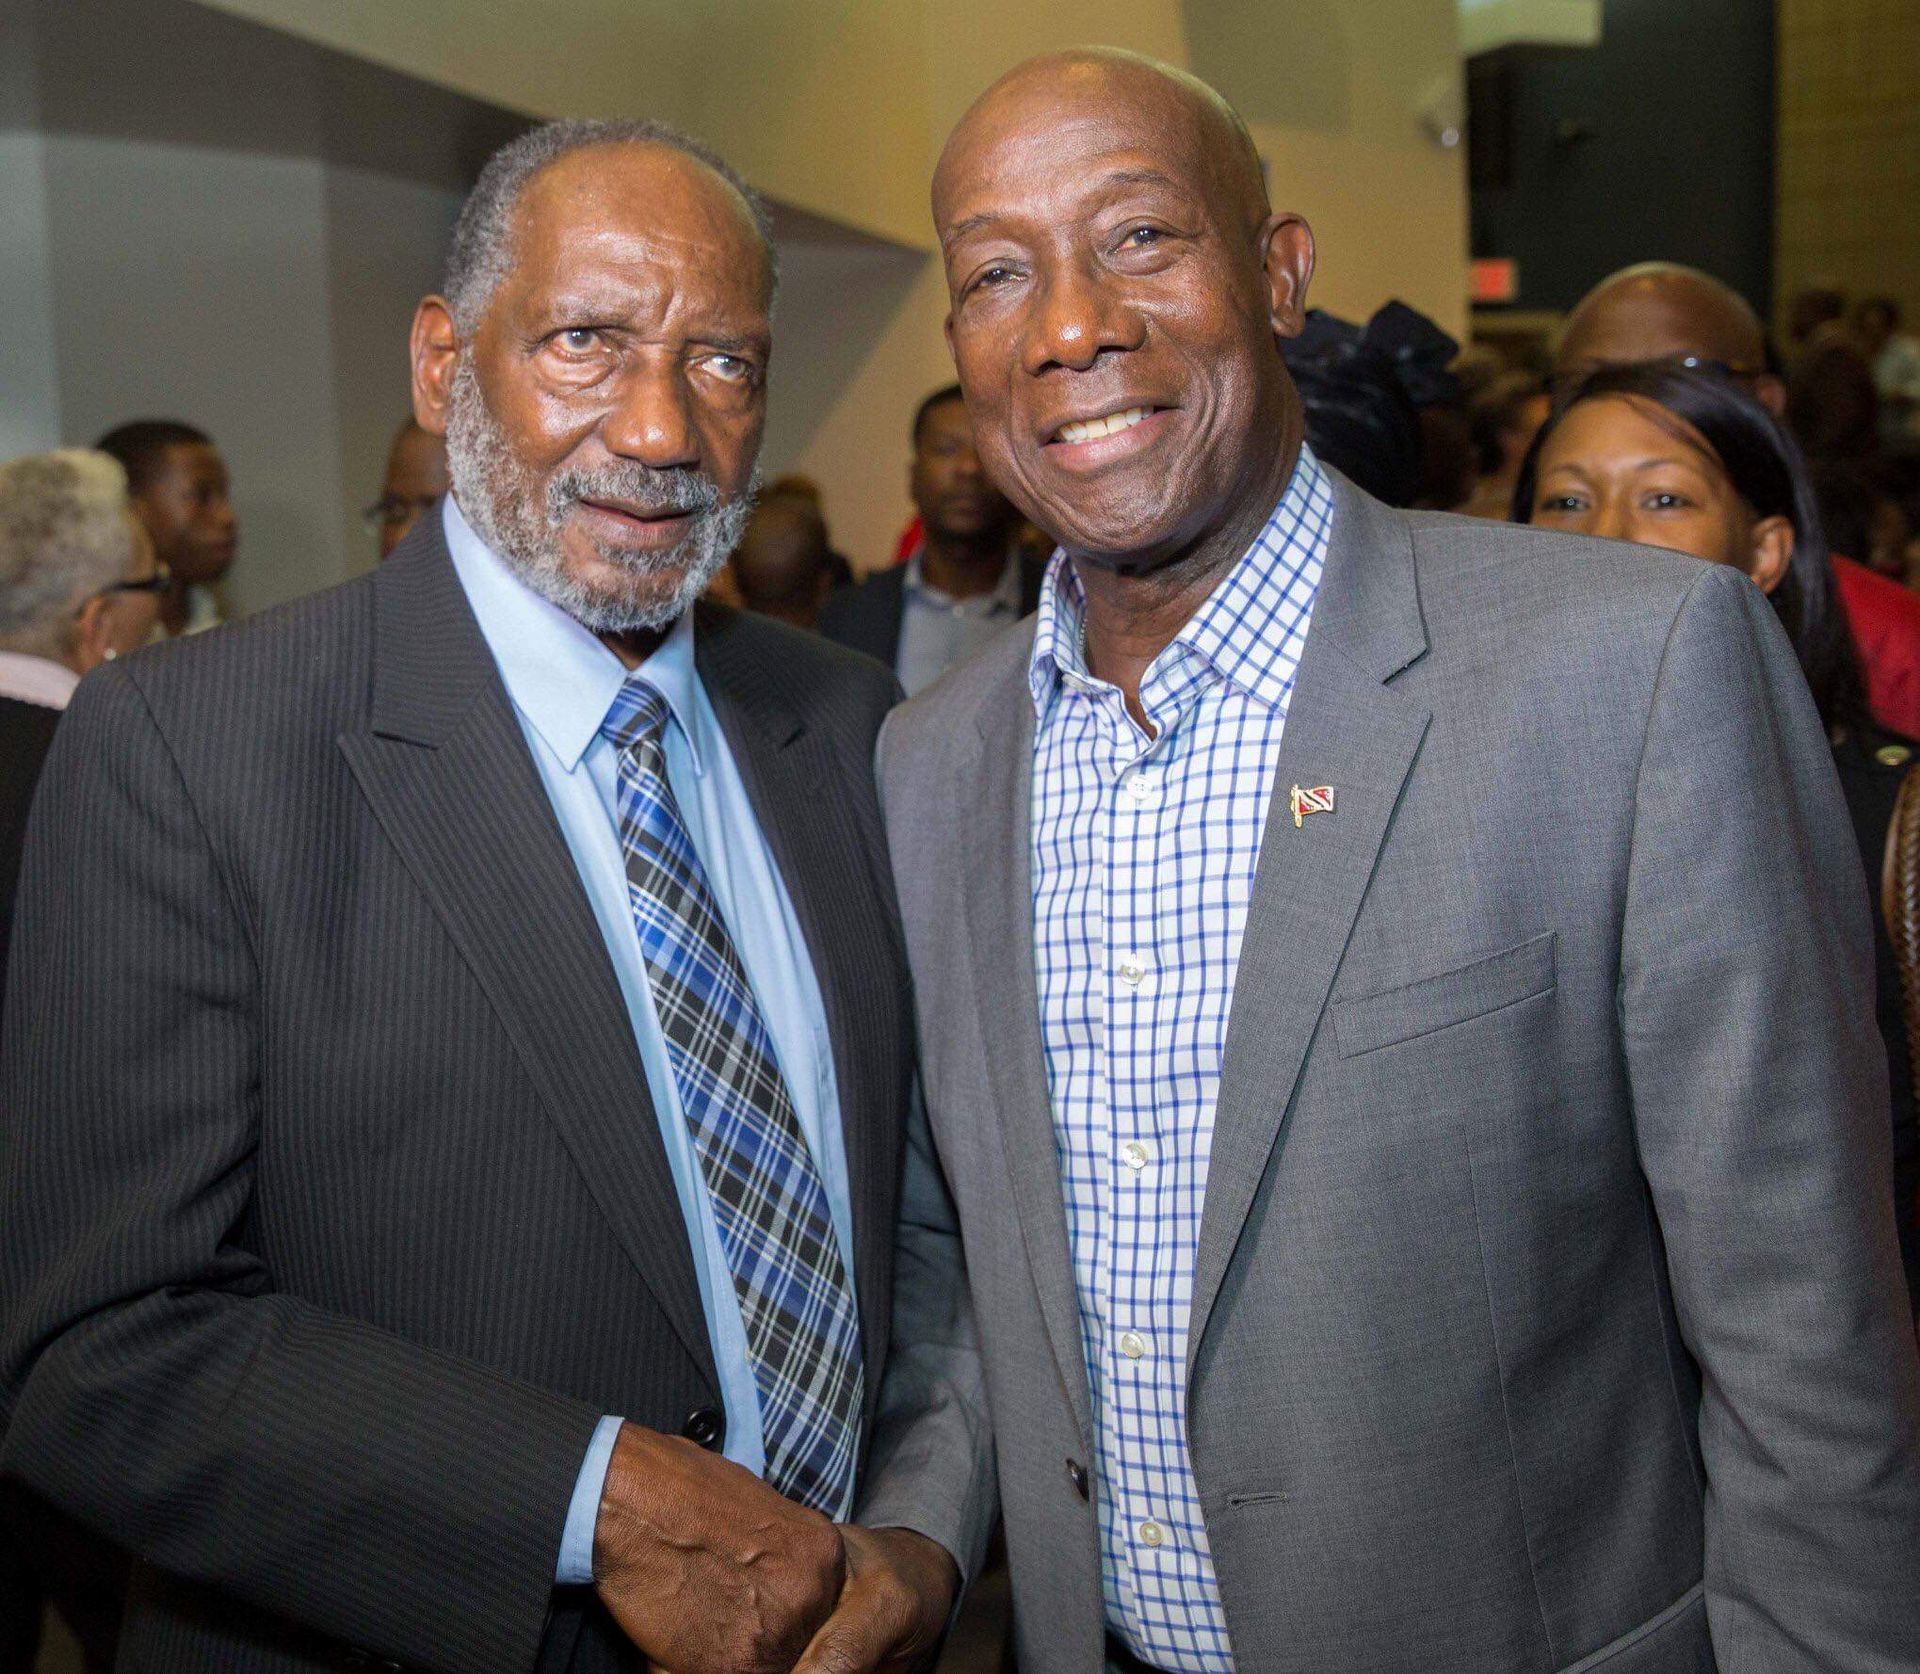 ormer national goalkeeper and coach Lincoln Phillips, left, with T&T Prime Minister Dr Keith Rowley in September 2019.